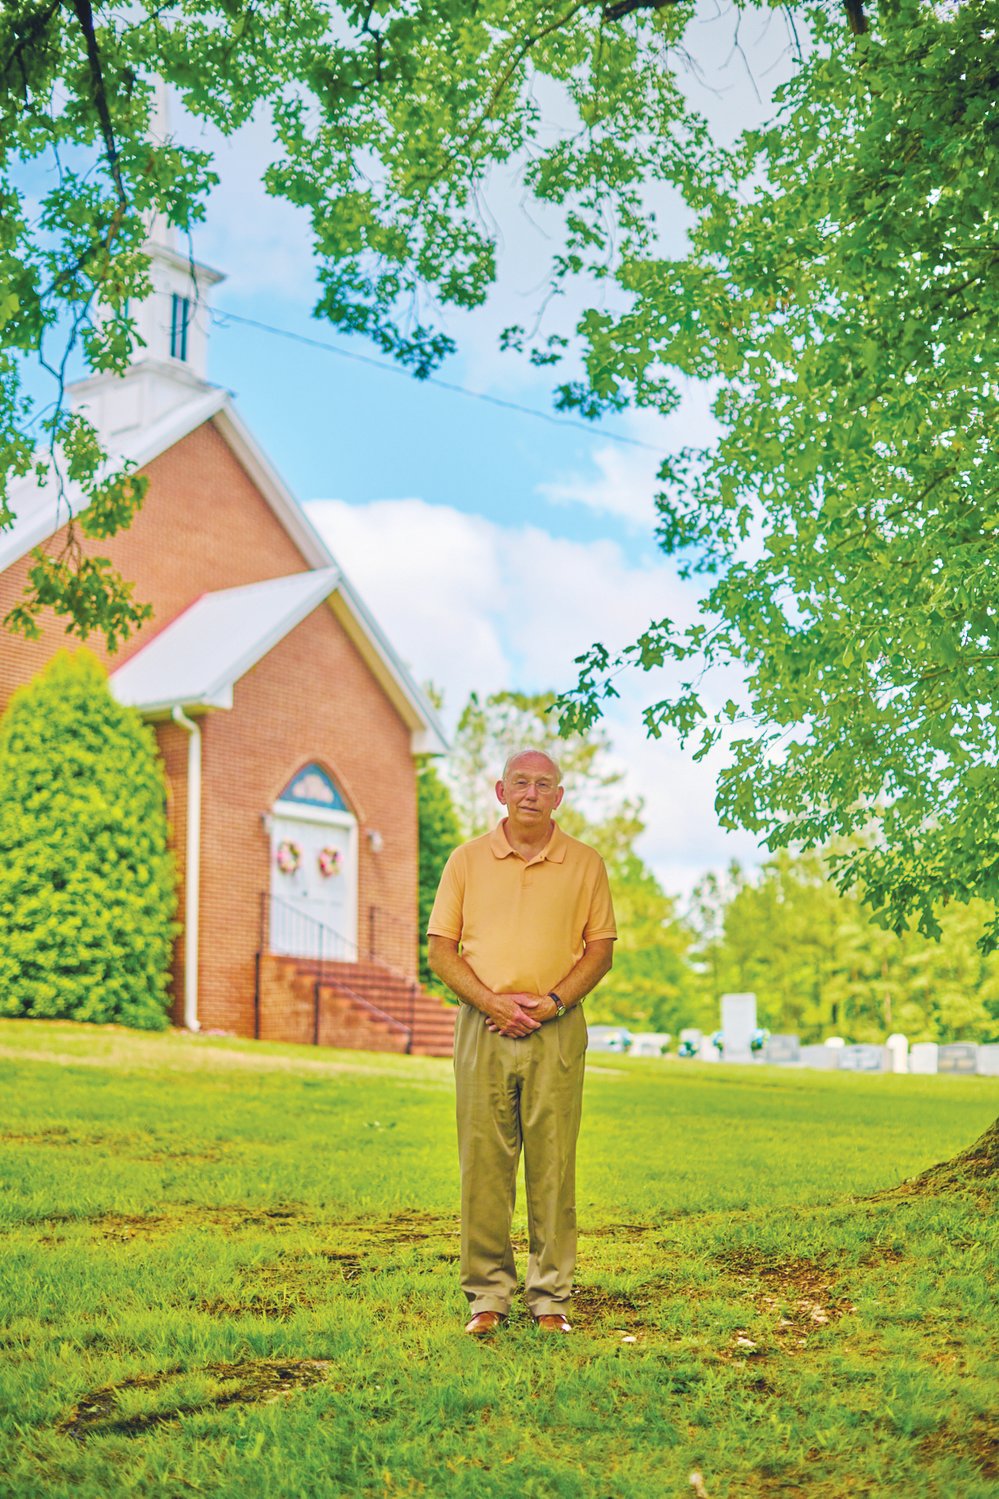 Ray Gooch, who some call the 'Pope of Chatham County,' is retiring after a four-decade career pastoring Pleasant Hill's and Browns Chapel's Methodist congregations in Pittsboro.